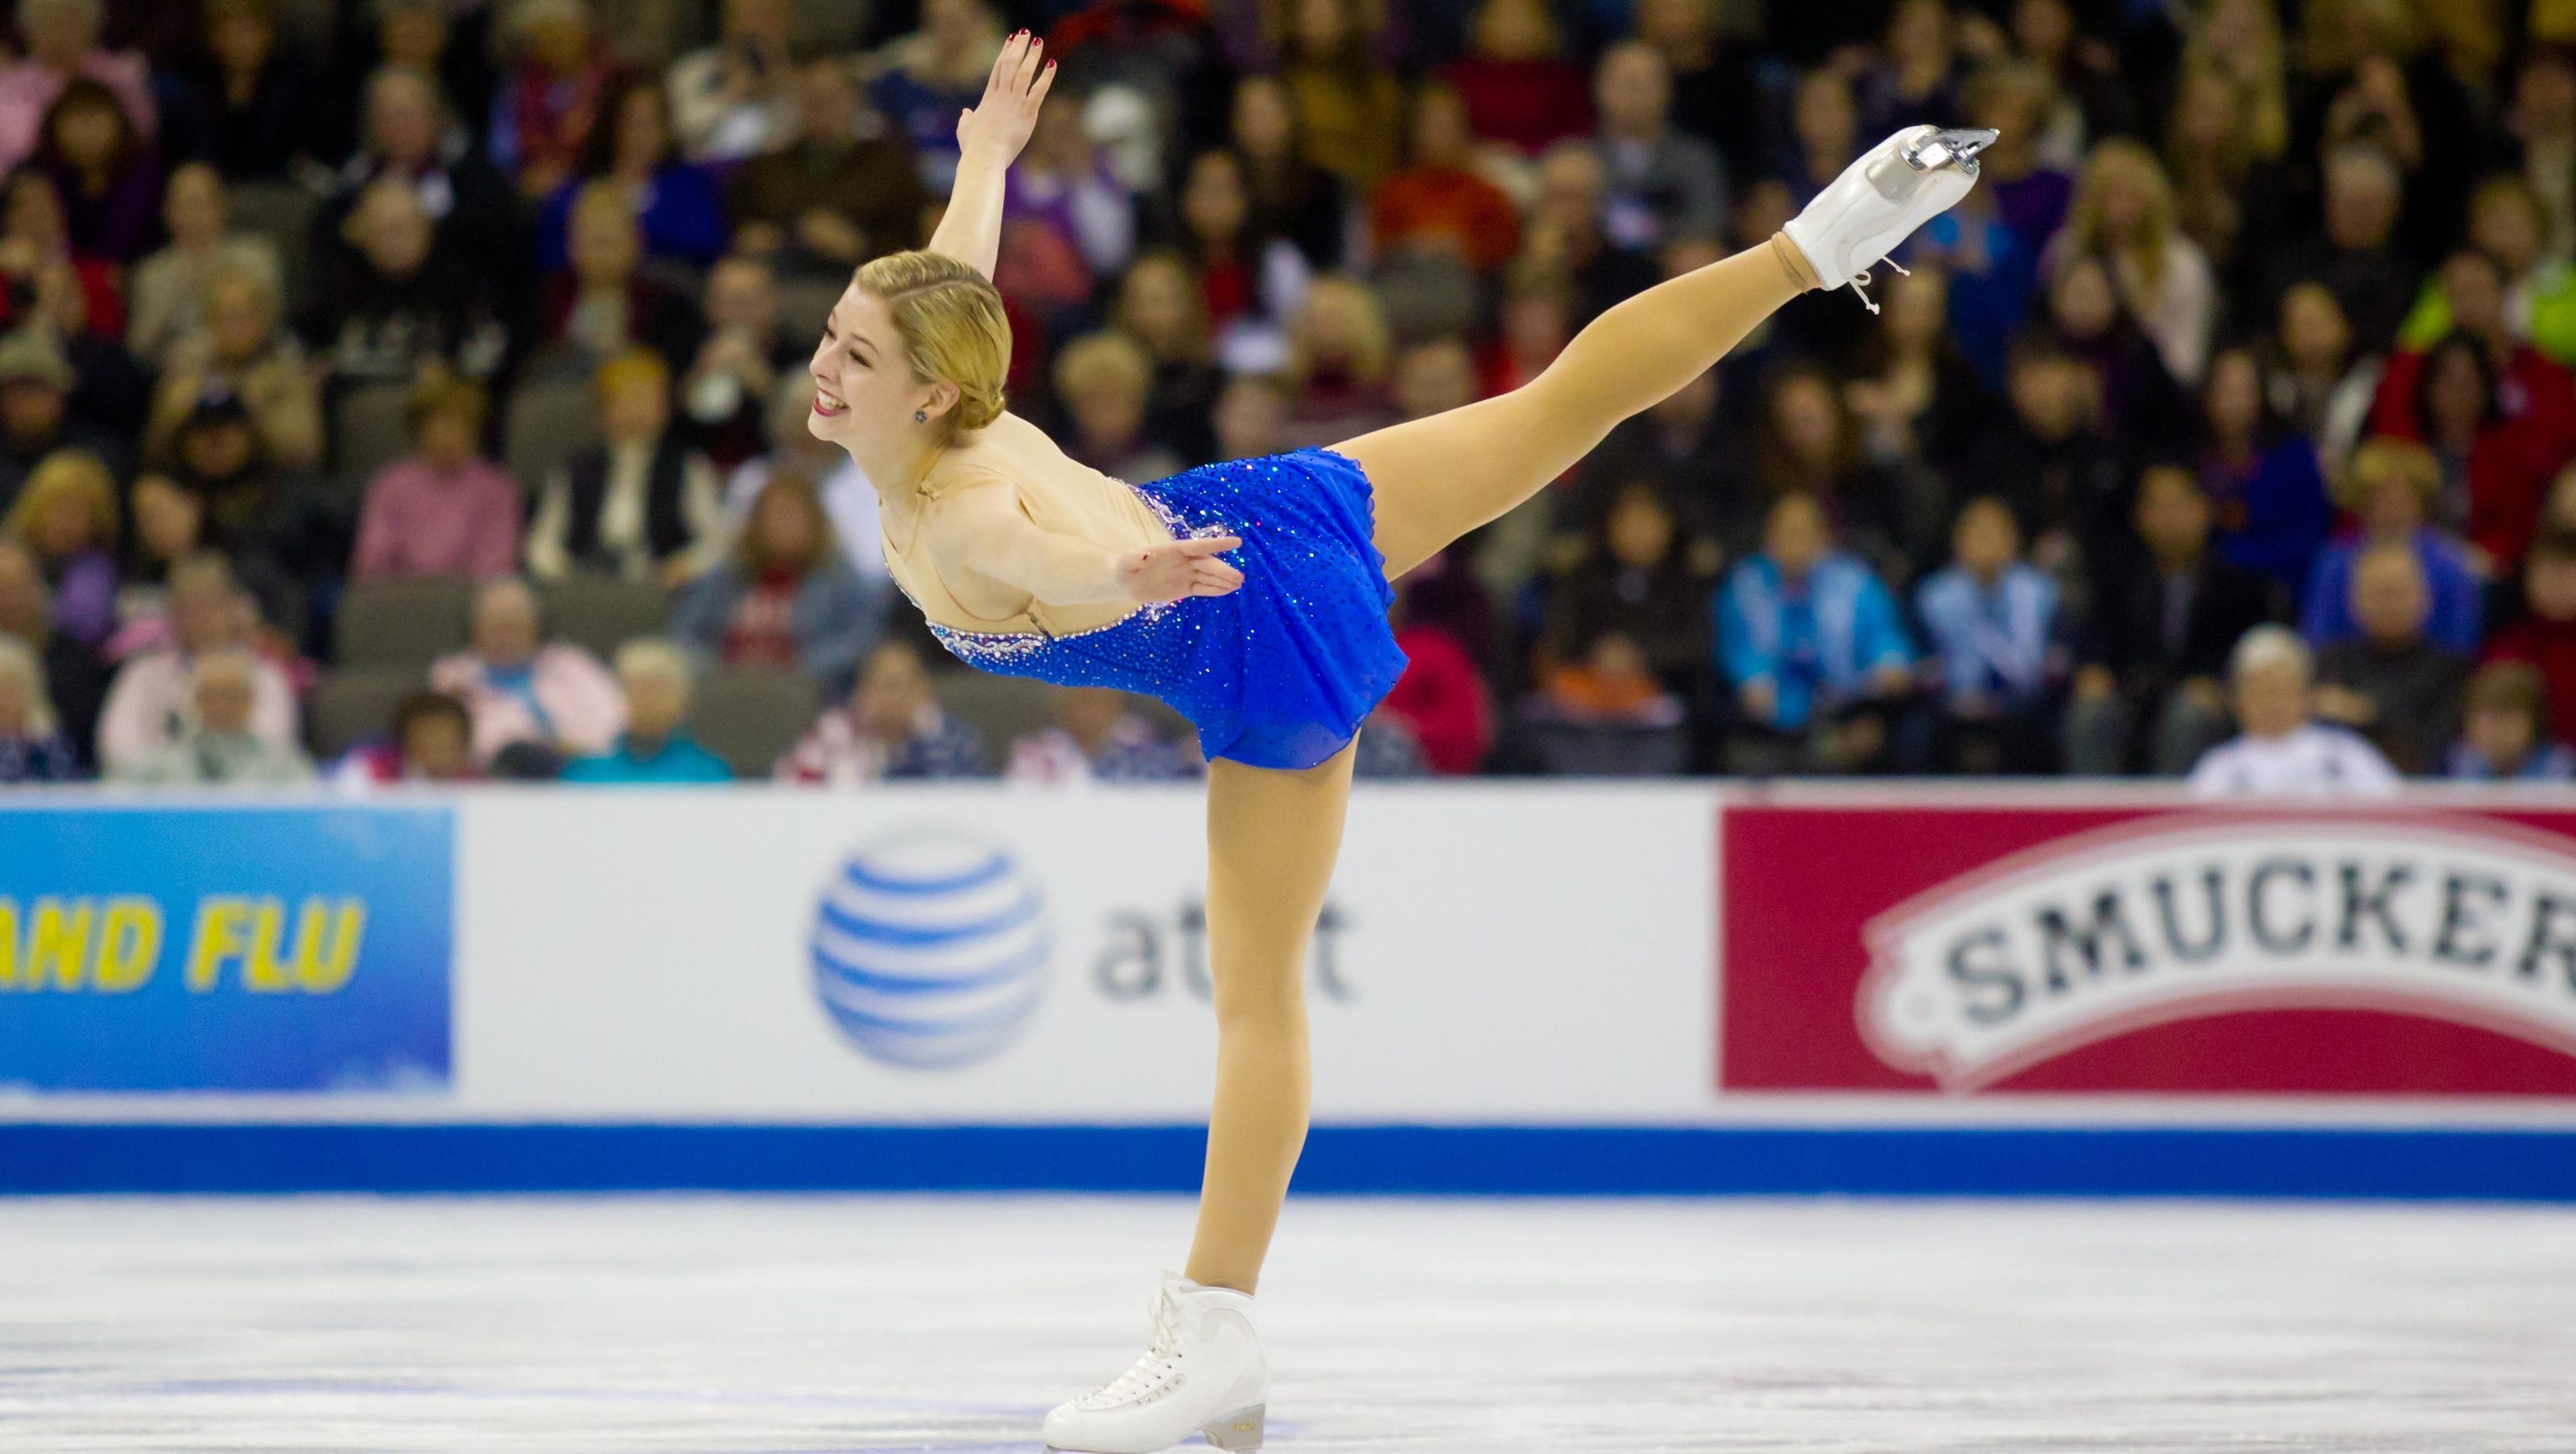 Gracie Gold Ashley Wagner Confident They Can Deliver